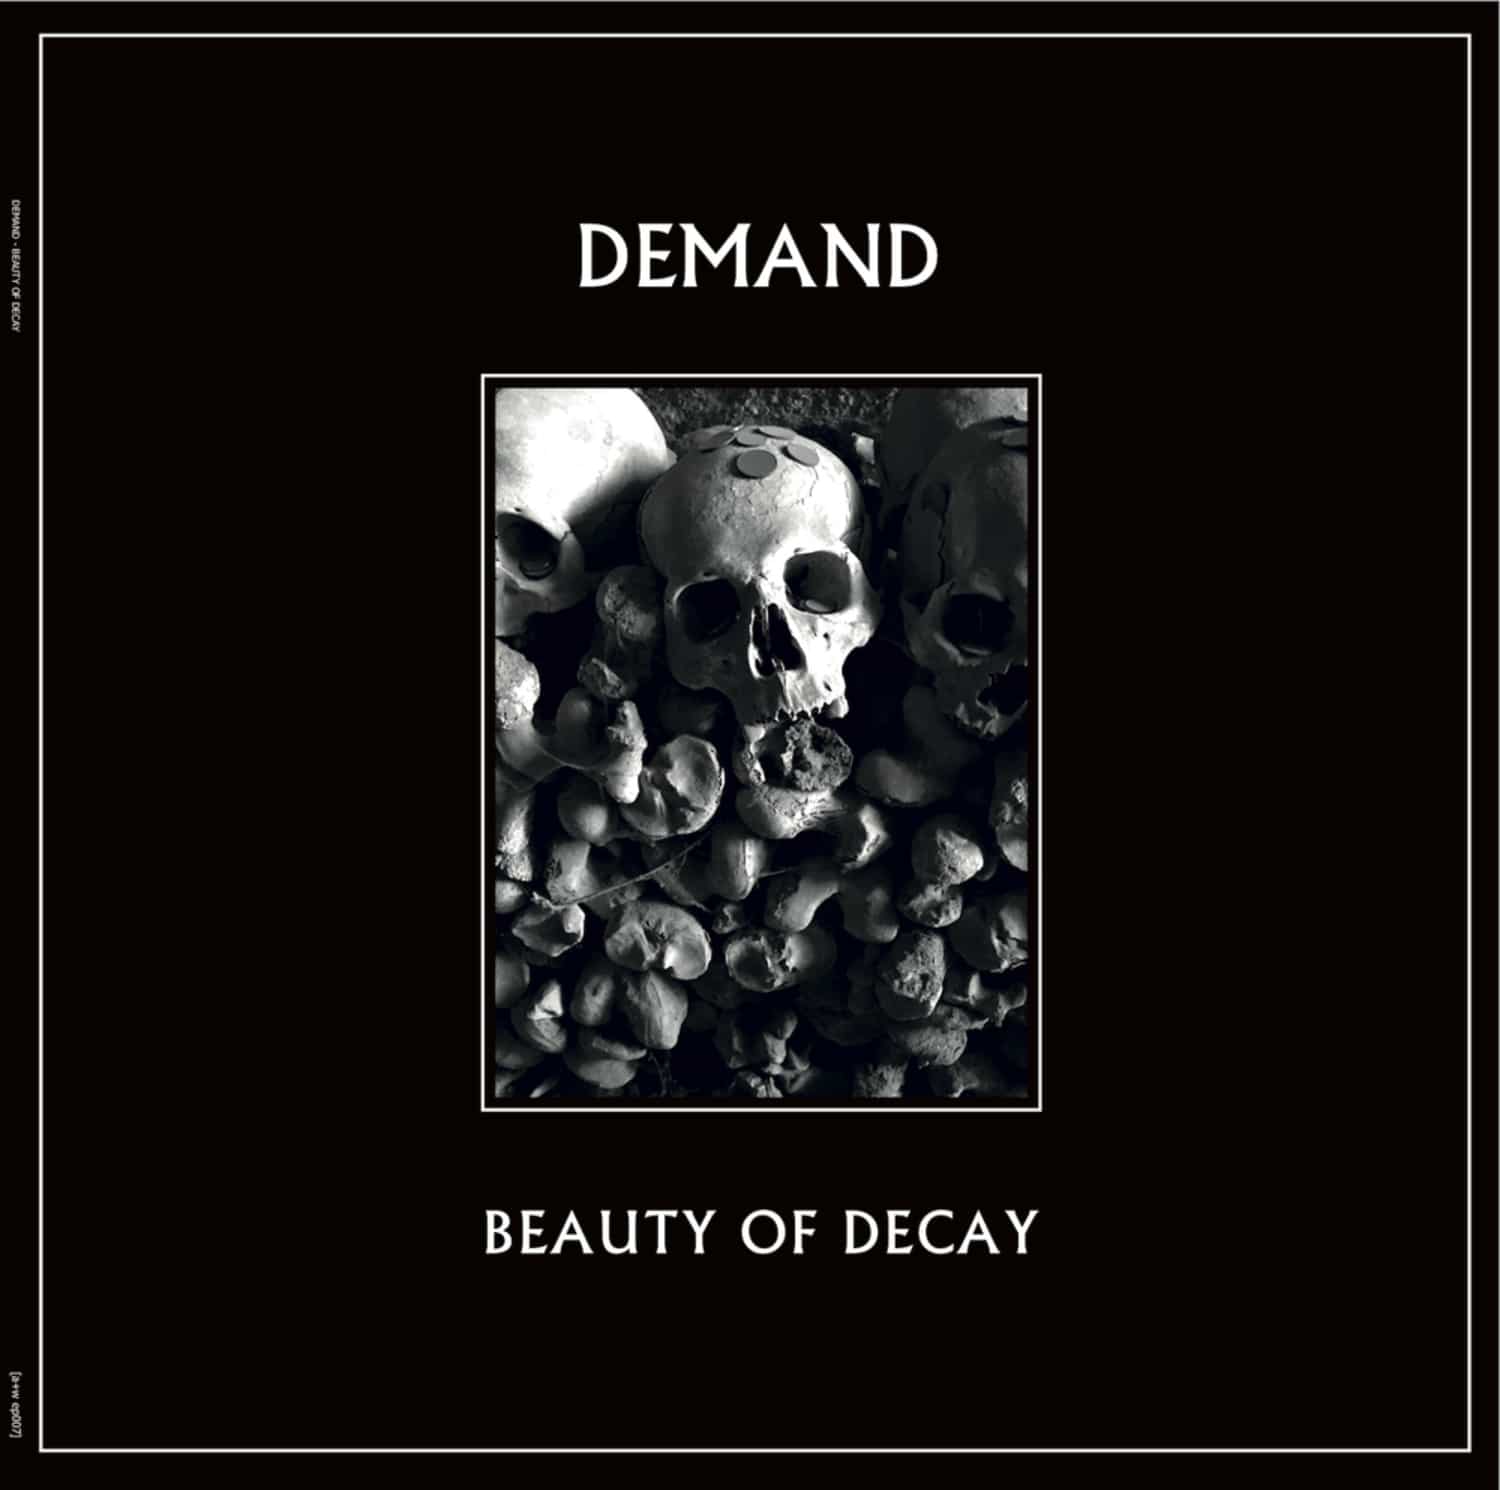 DEMAND - BEAUTY OF DECAY